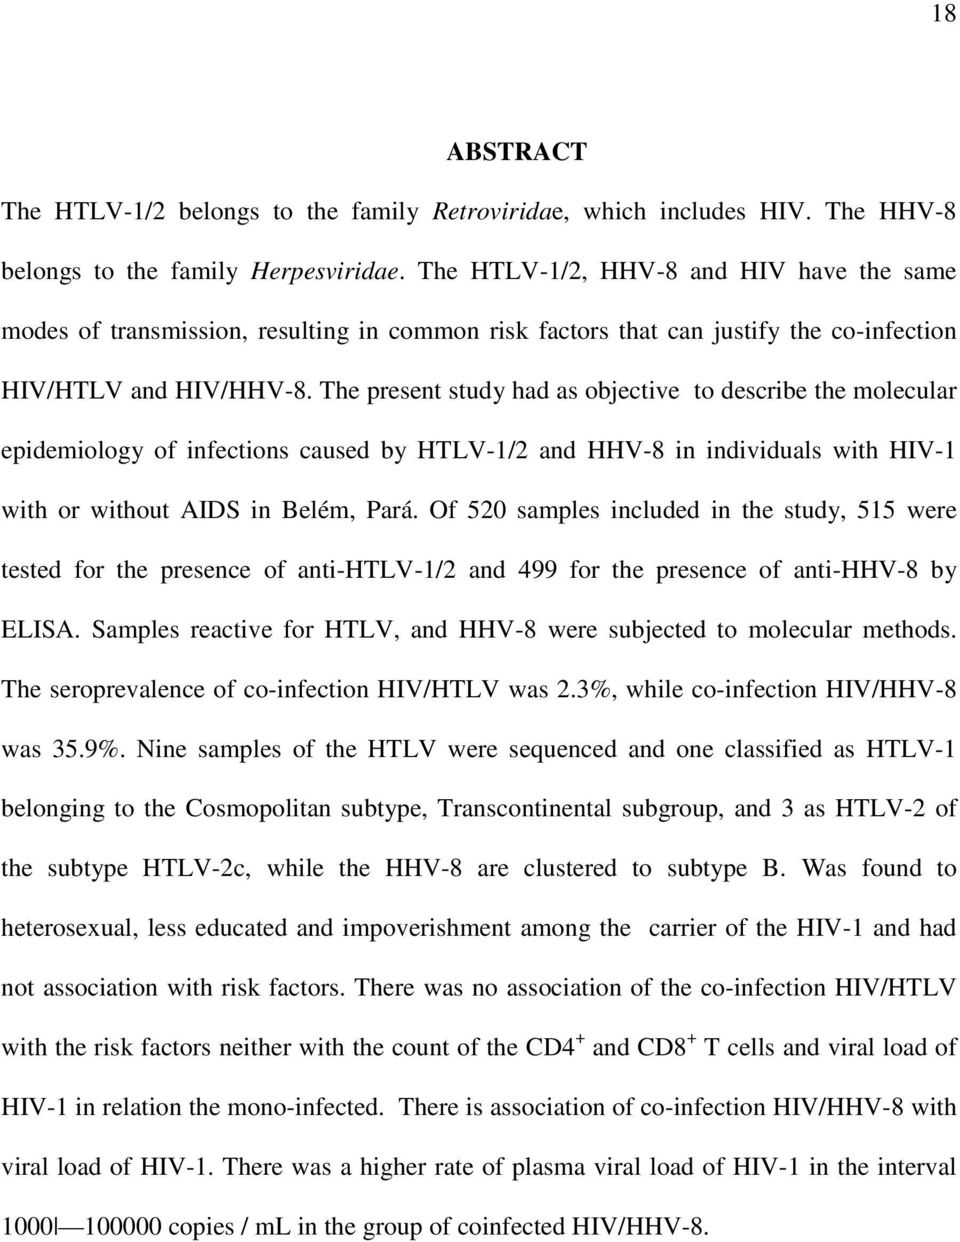 The present study had as objective to describe the molecular epidemiology of infections caused by HTLV-1/2 and HHV-8 in individuals with HIV-1 with or without AIDS in Belém, Pará.